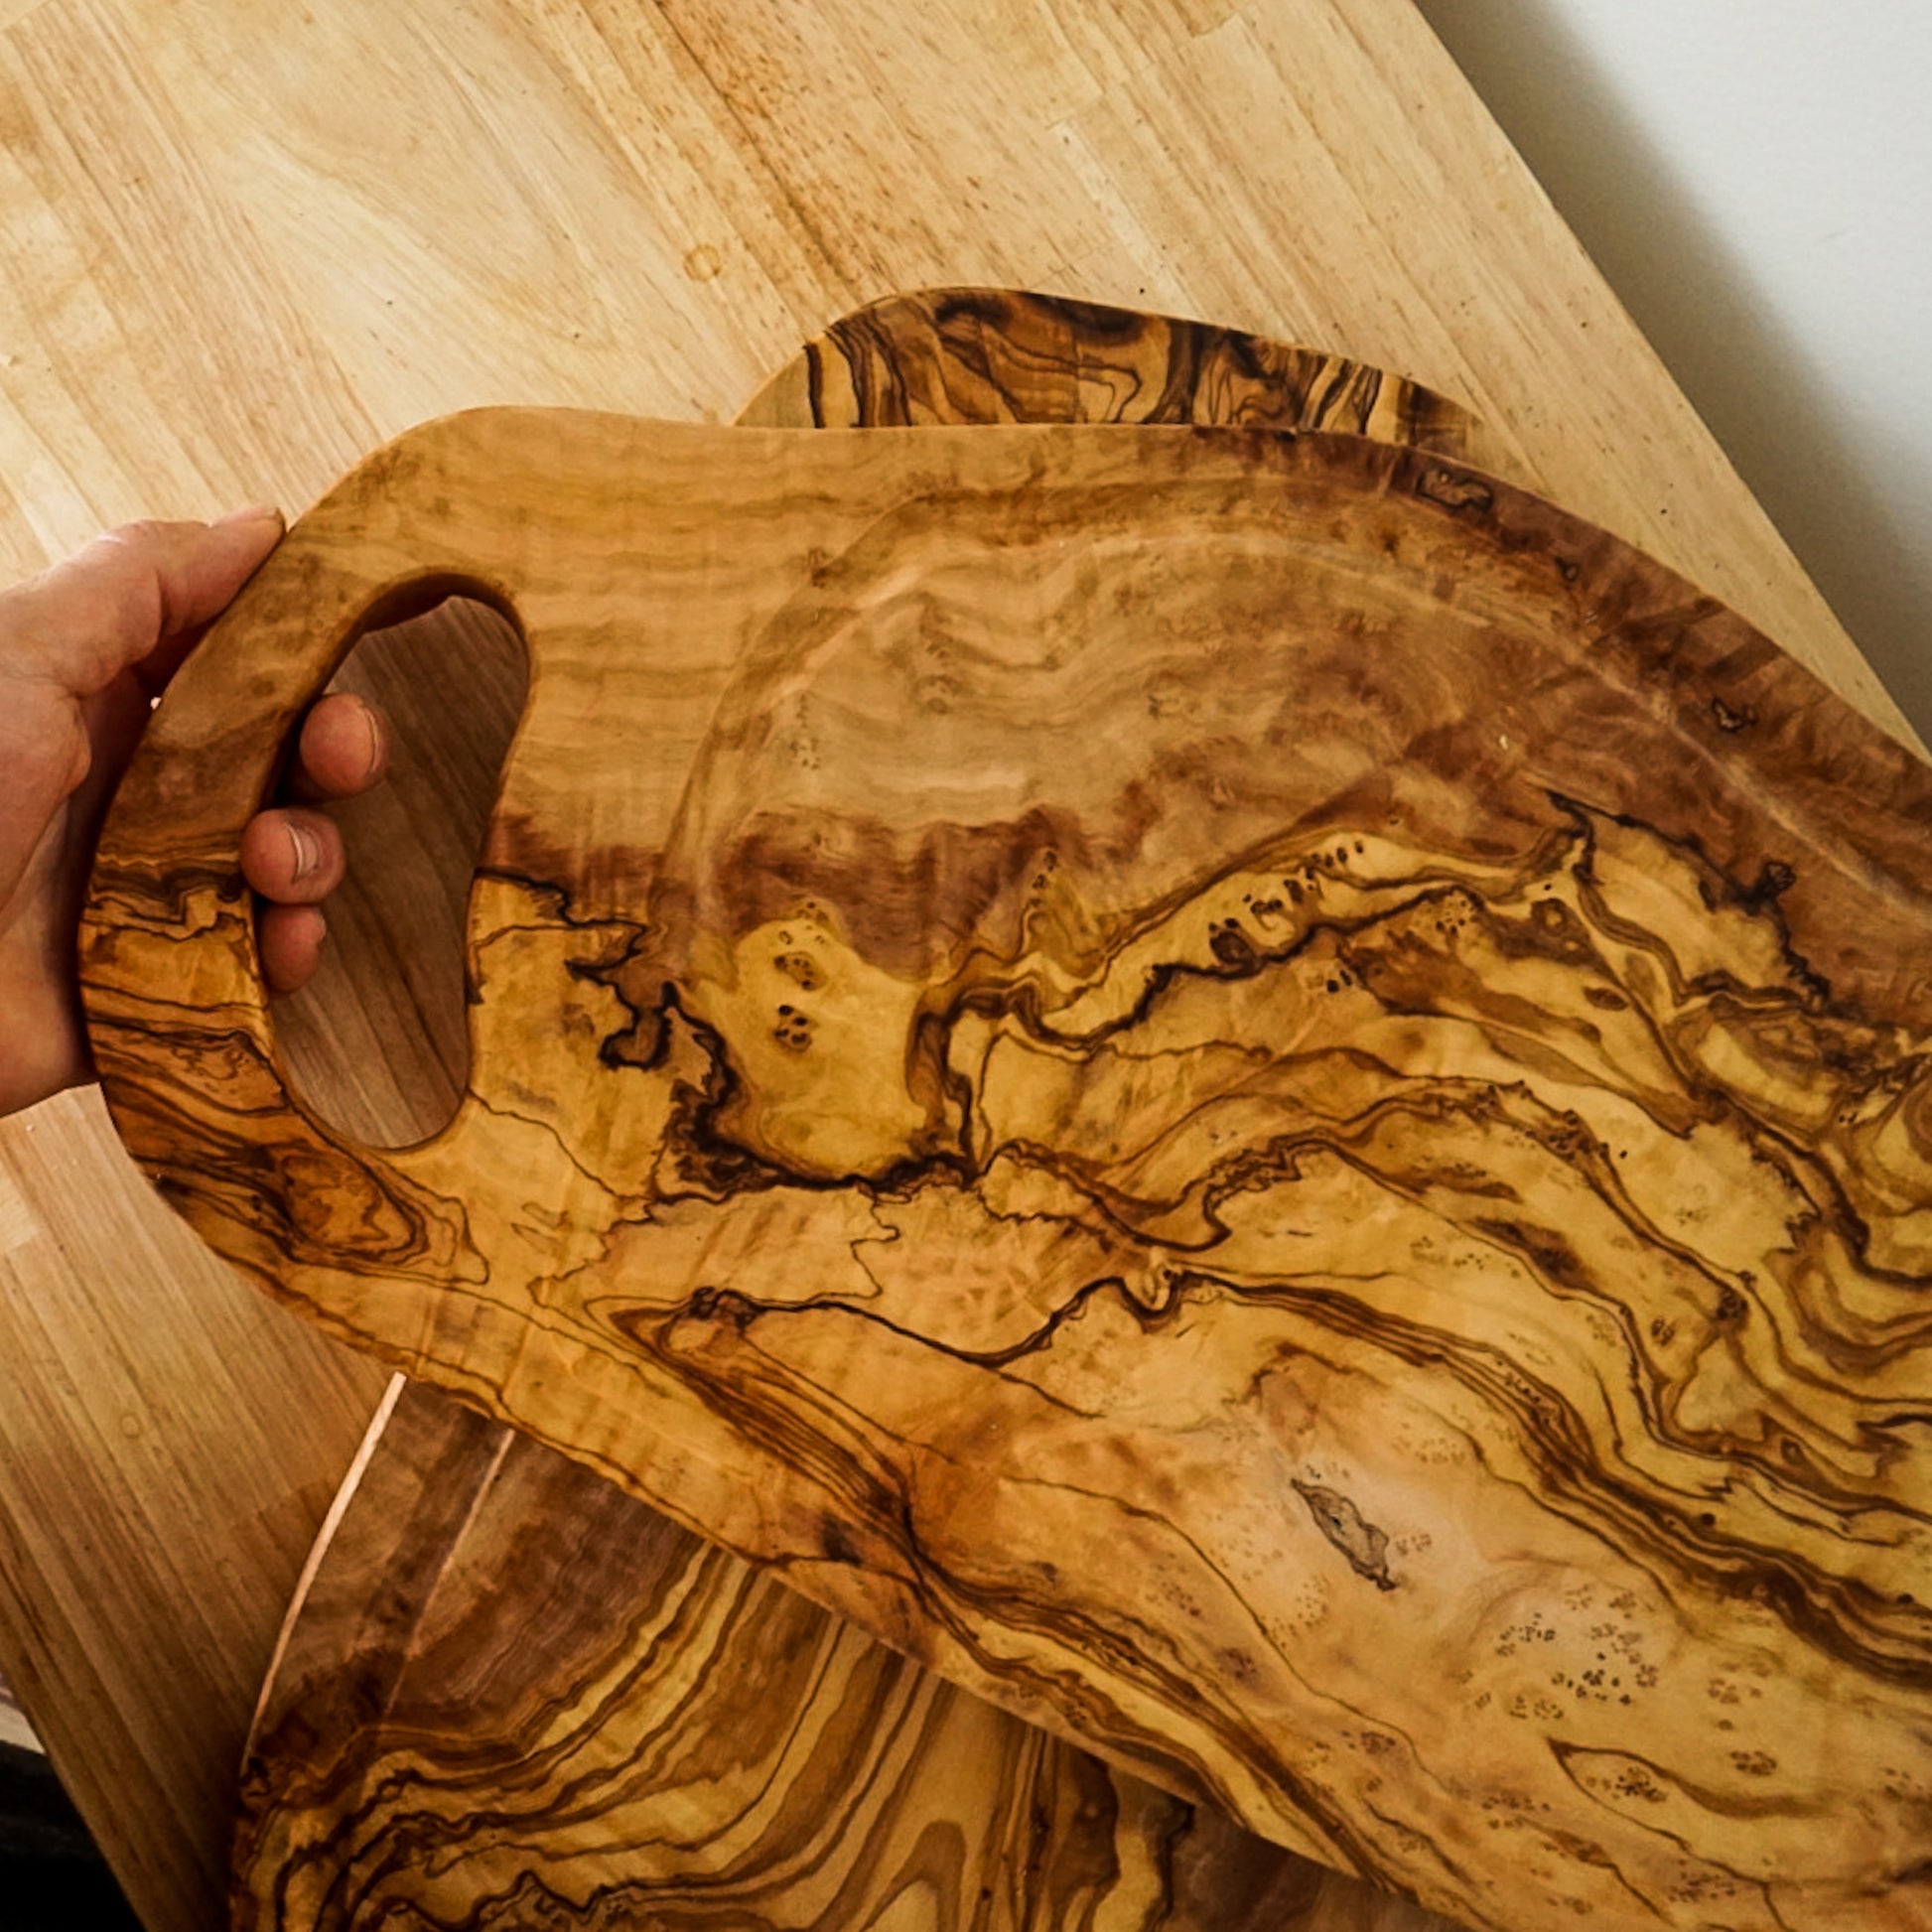 Tunisian Olive Wood Large Carving Board – Shop Our Favorites